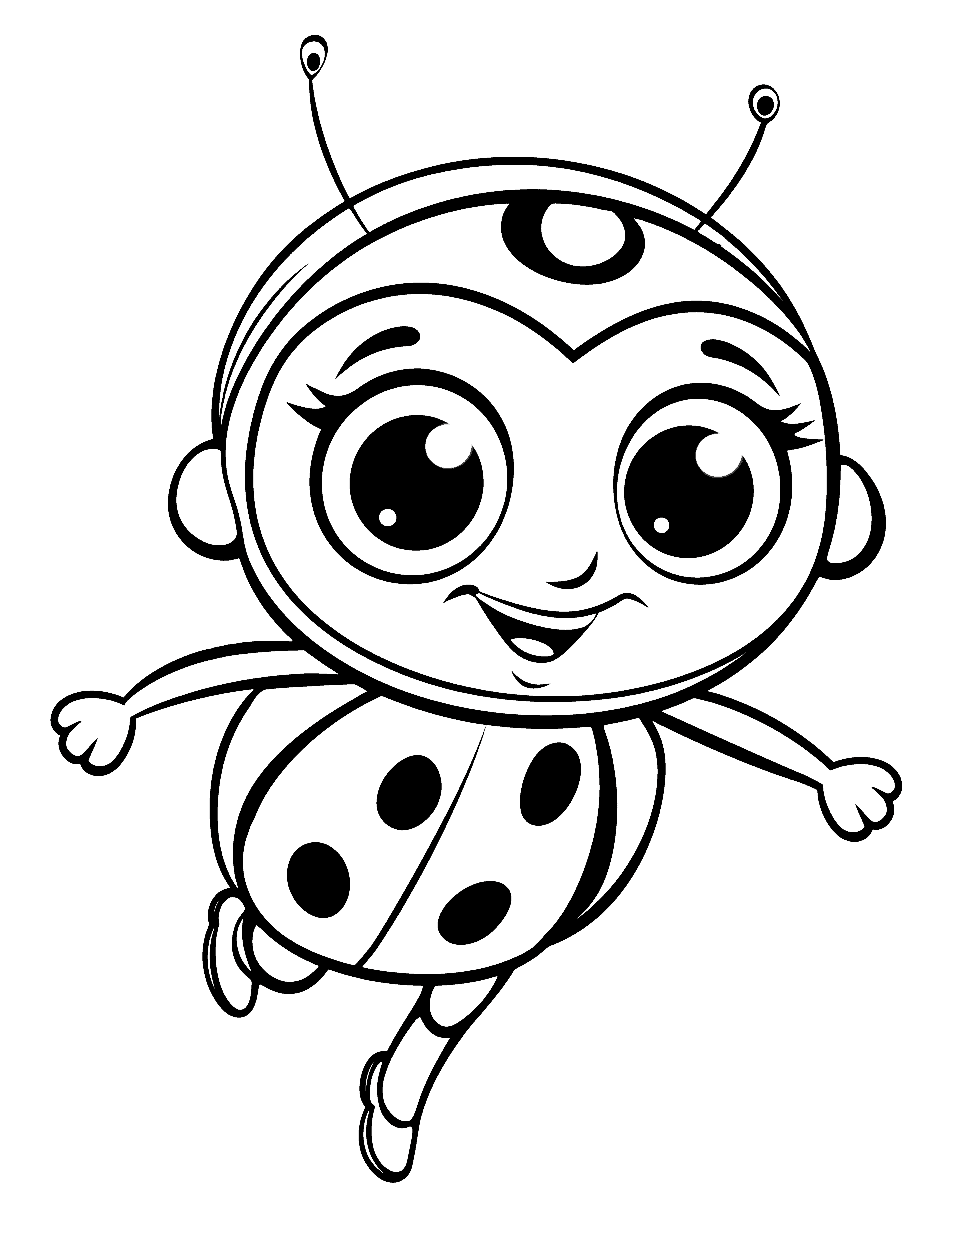 Heroic Super Ladybug Coloring Page - A super ladybug in flight, with a determined look.